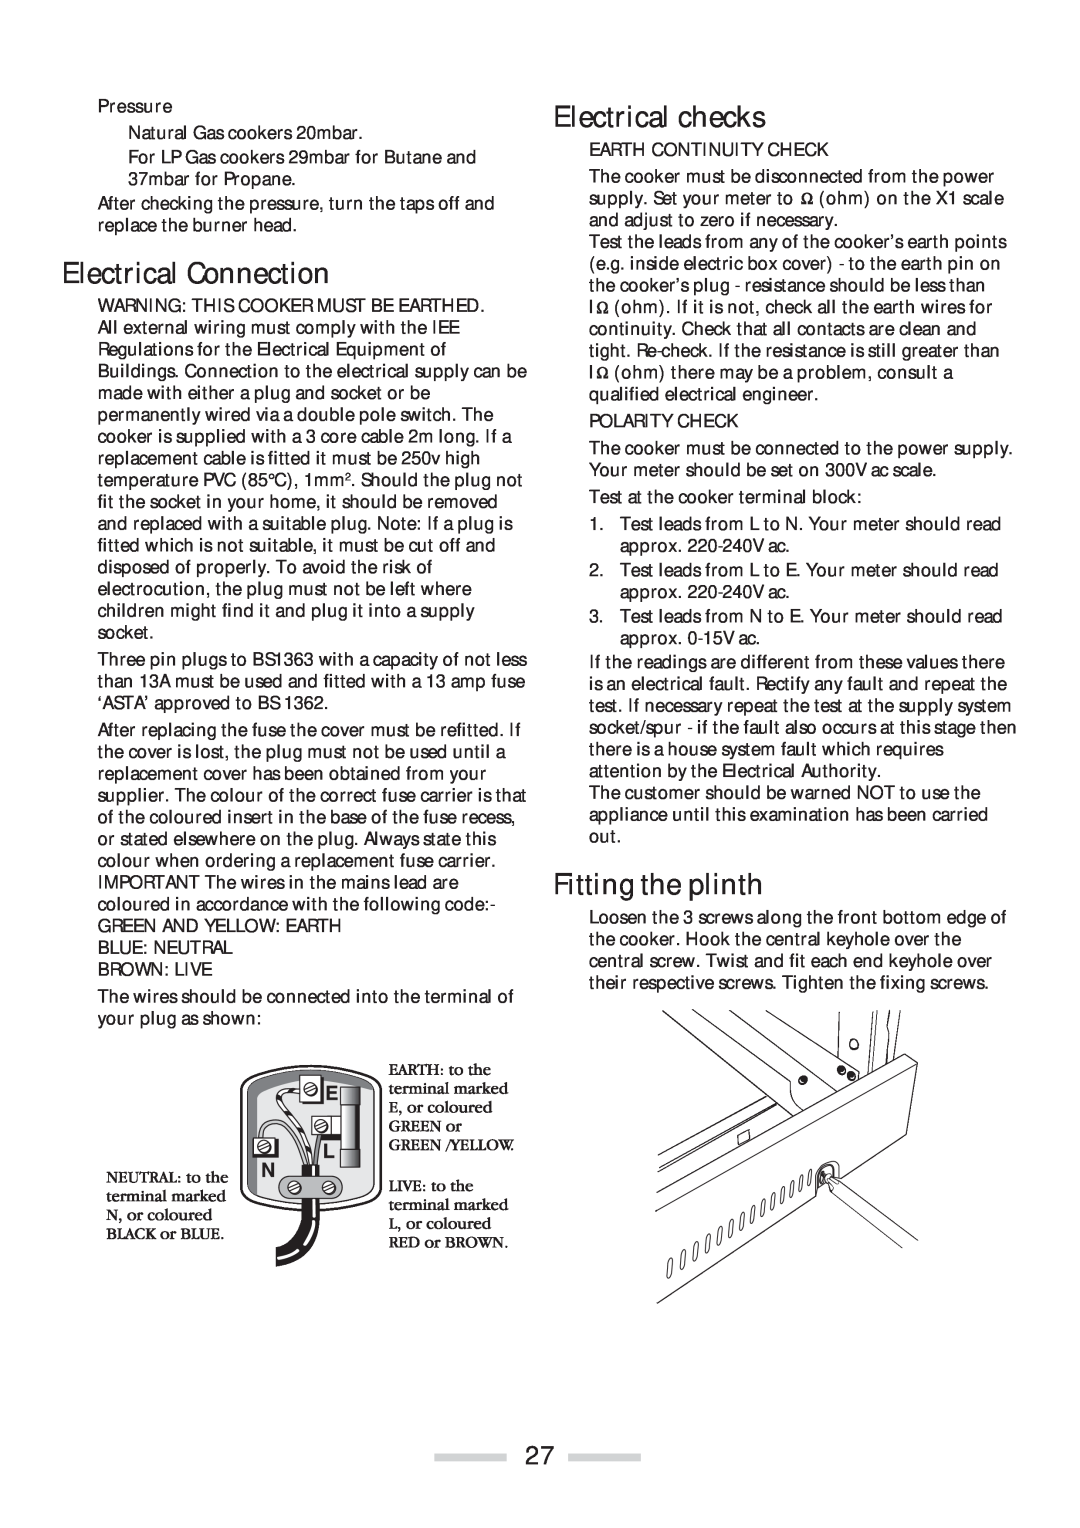 Rangemaster 110 installation instructions Electrical Connection, Electrical checks, Fitting the plinth, Pressure 